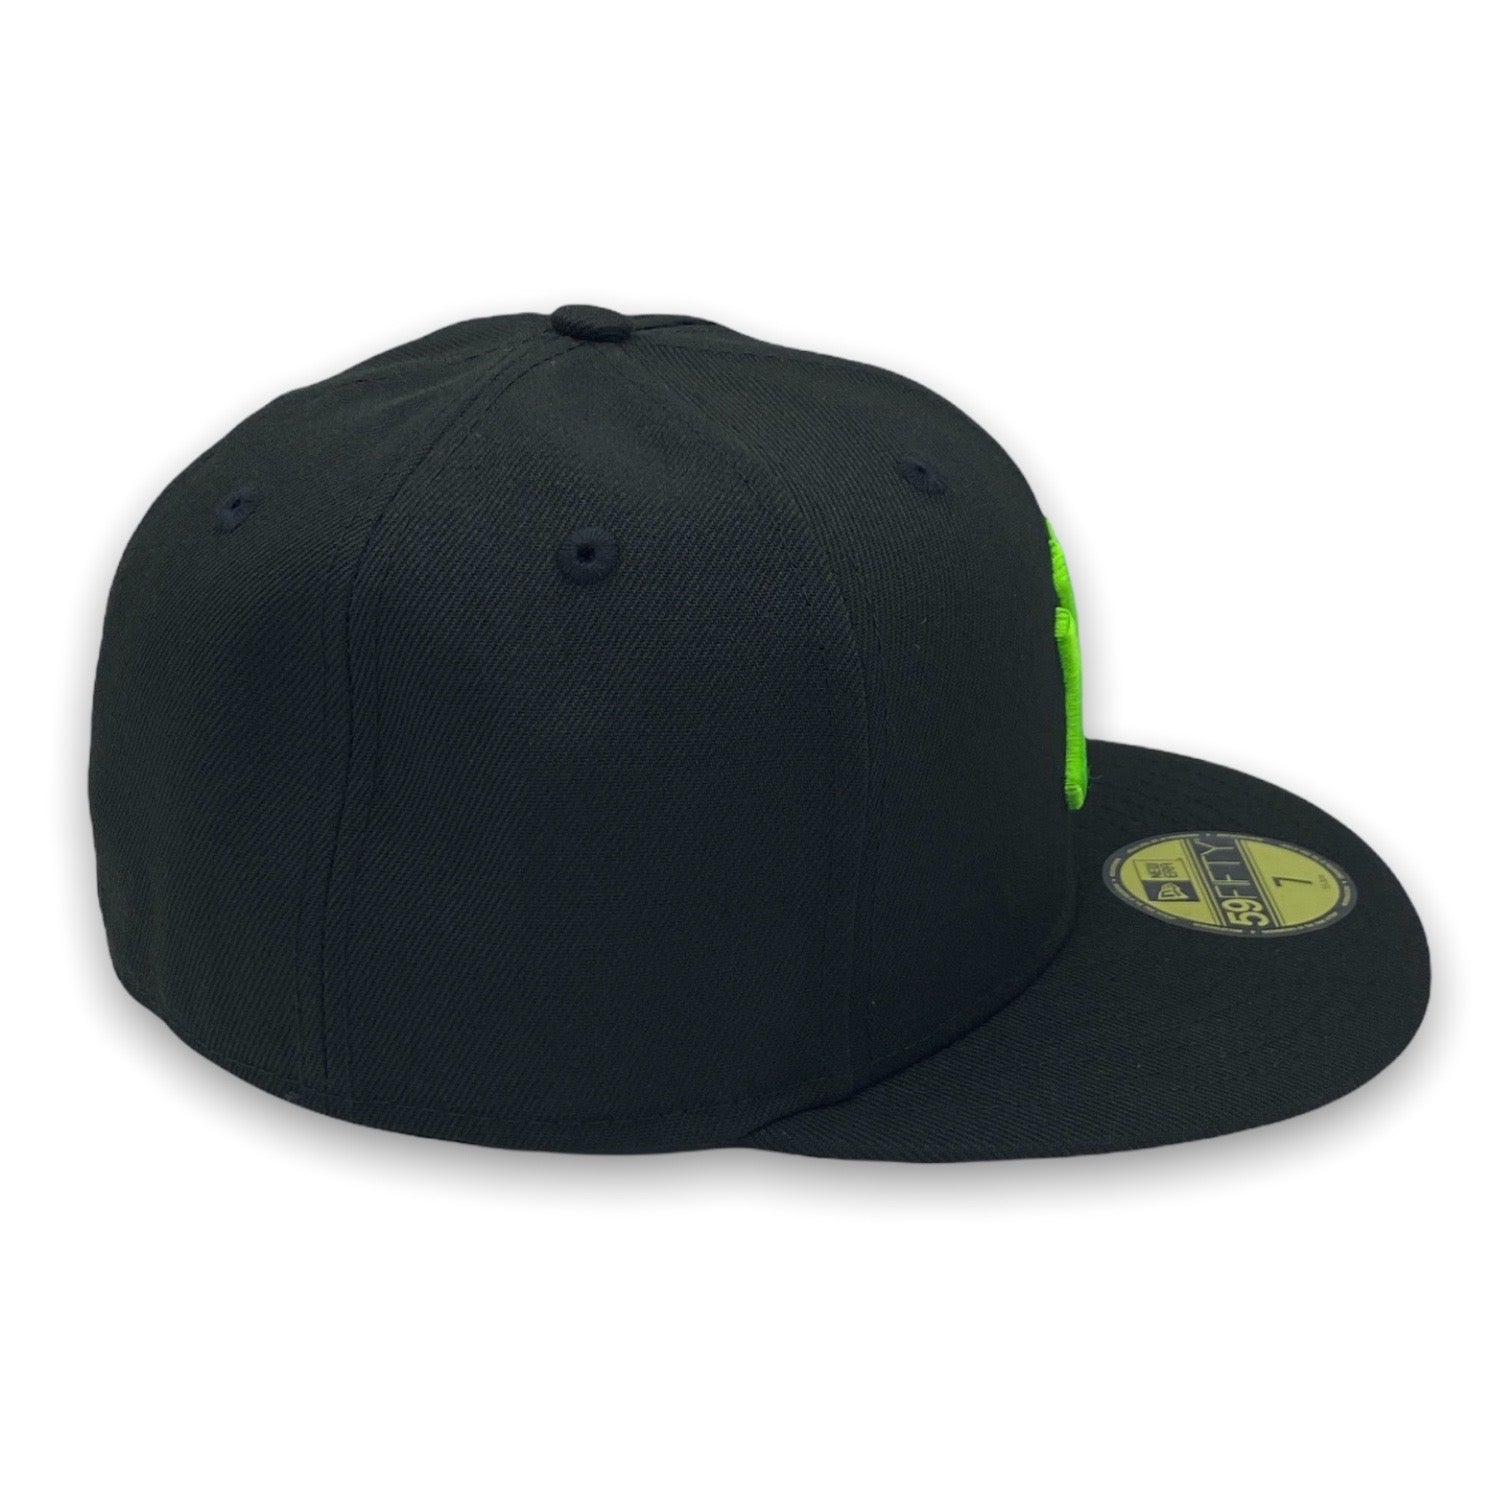 New York Yankees TEAM-BASIC Lime-White Fitted Hat by New Era